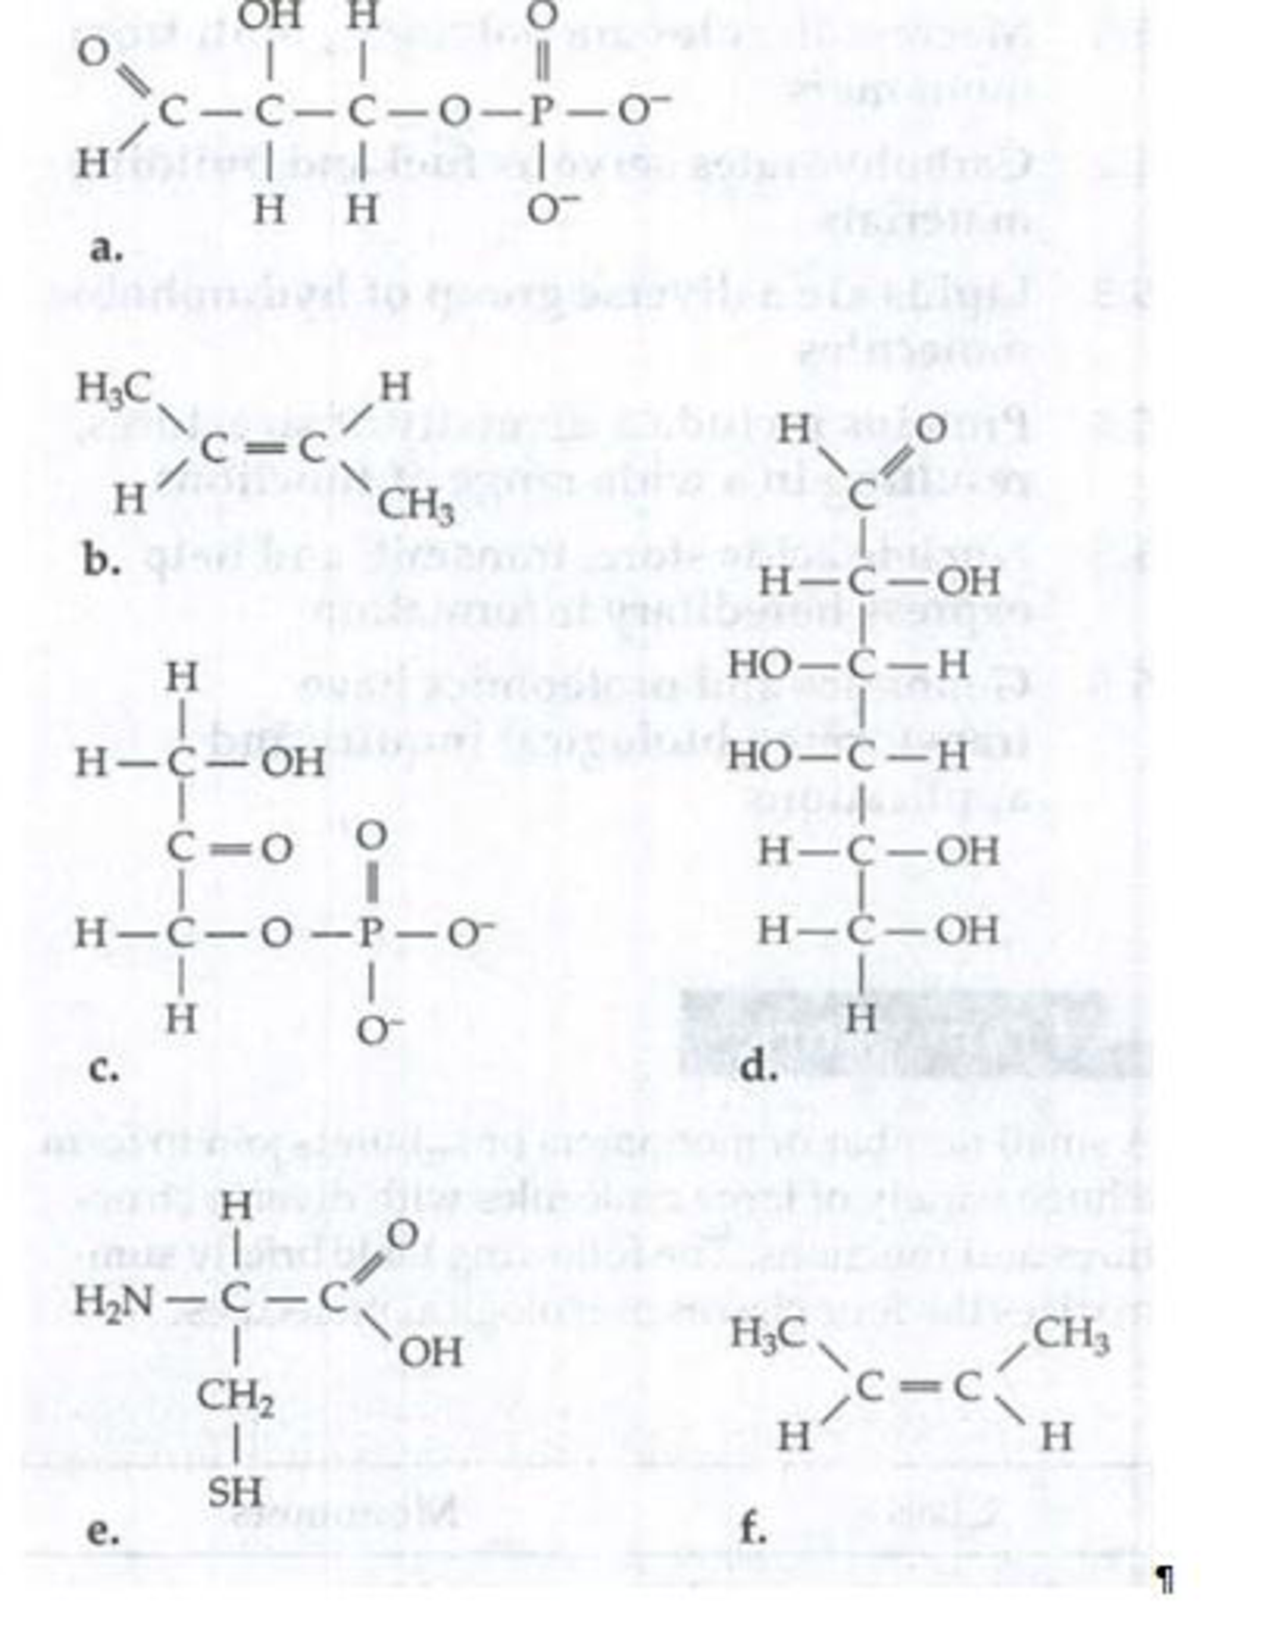 Chapter 4, Problem 5TYKM, can make cross-link in protein 